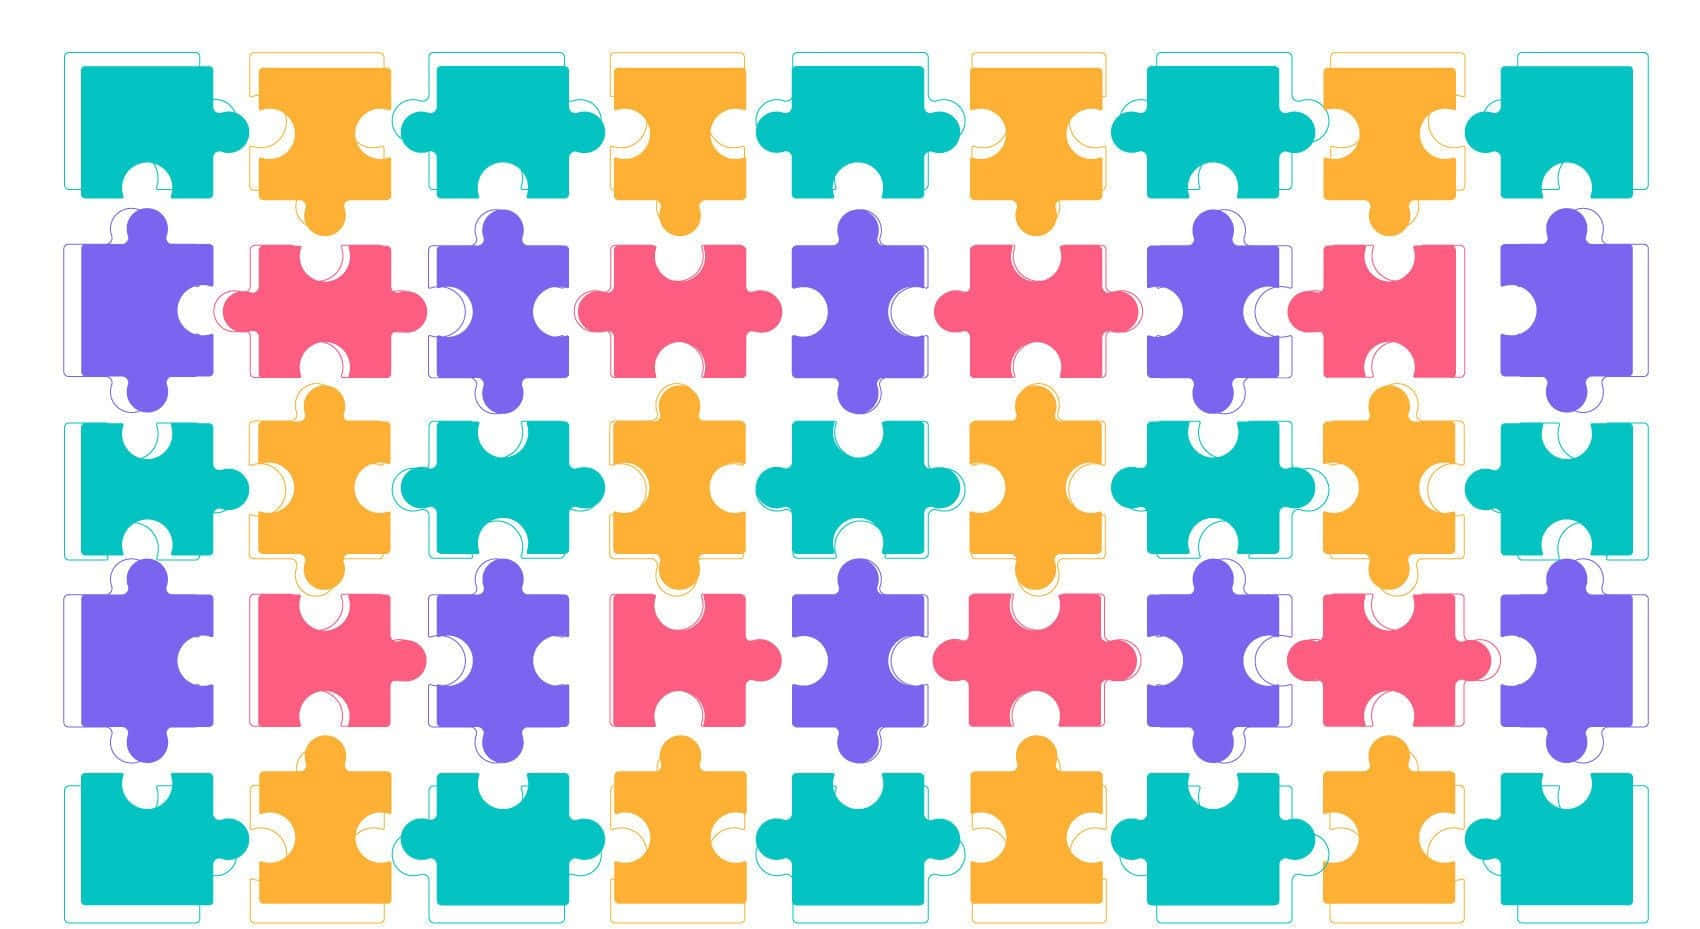 A Colorful Puzzle Piece Pattern With Different Colors